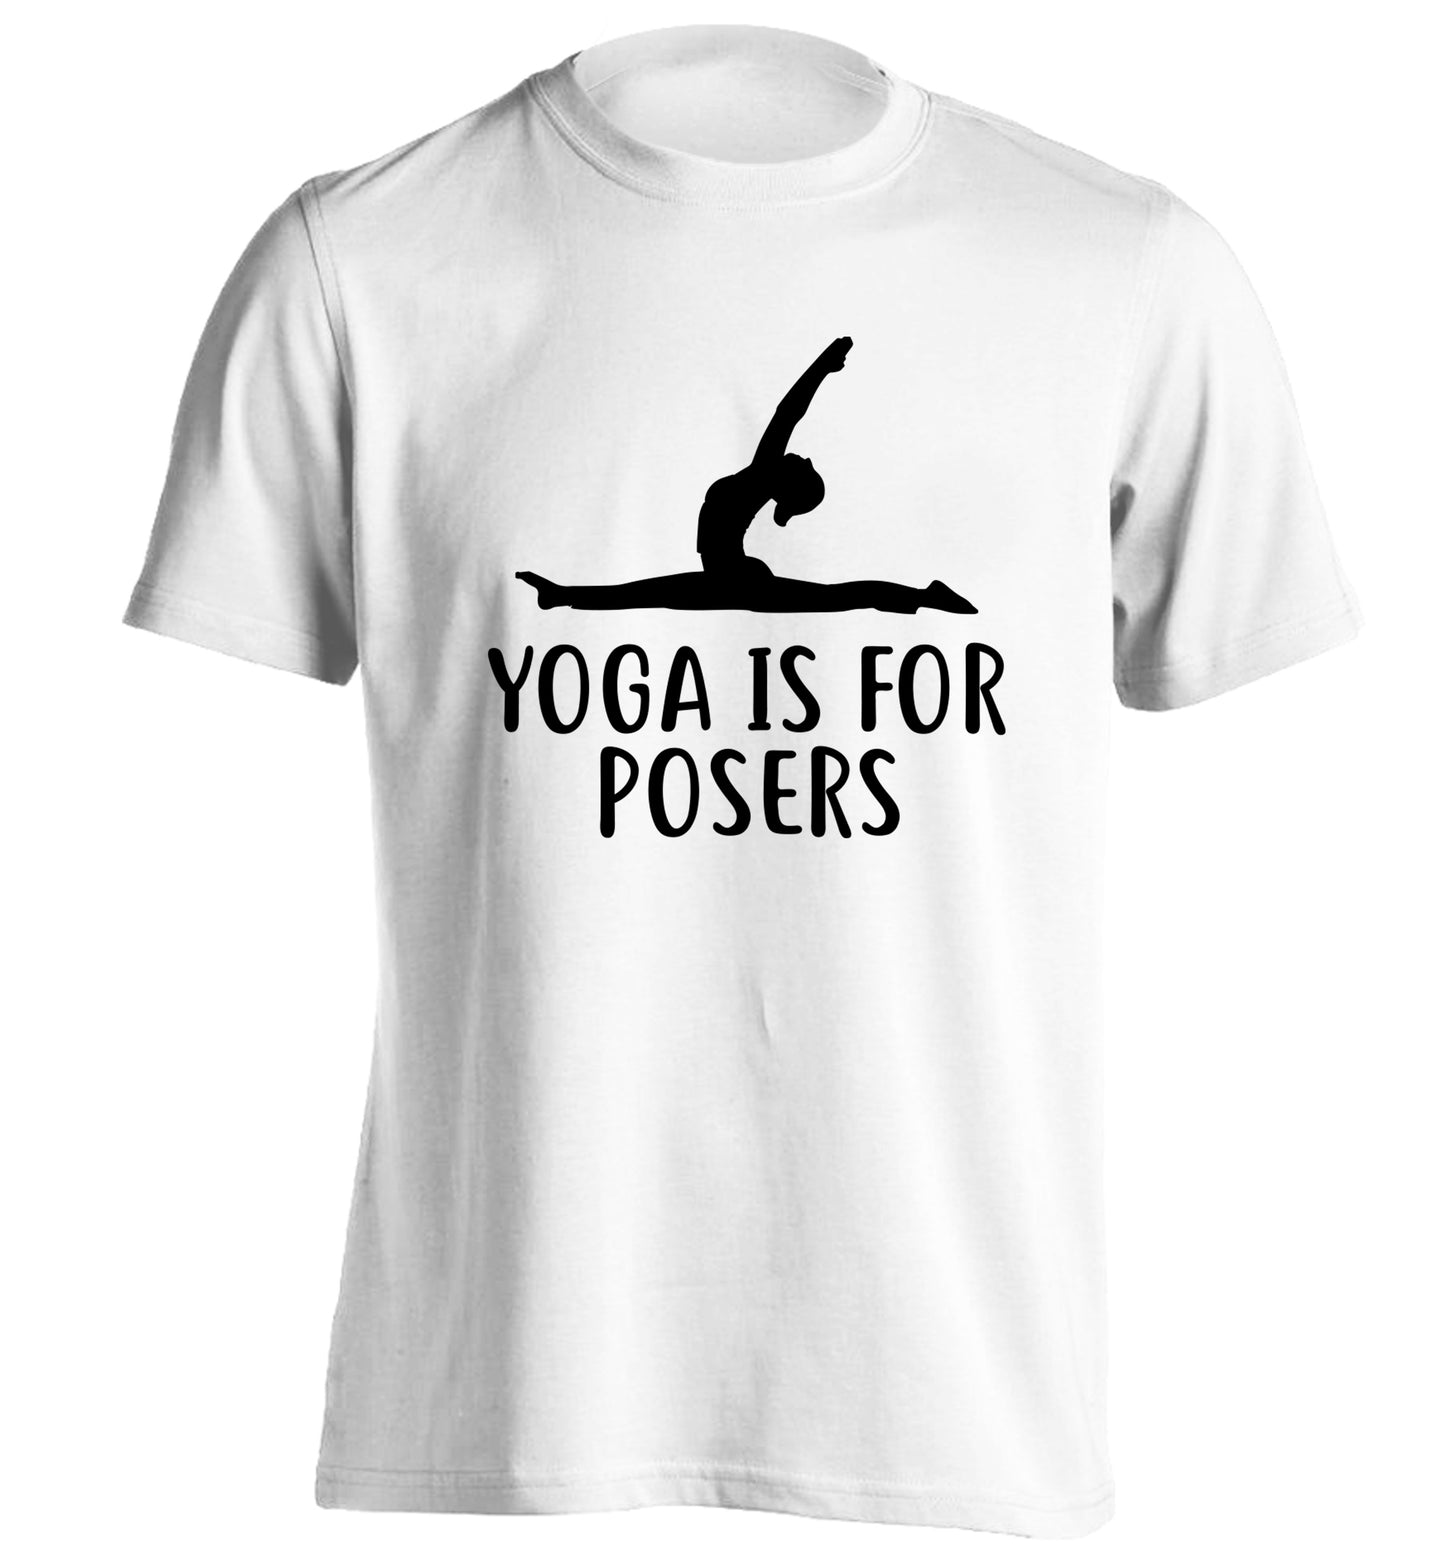 Yoga is for posers adults unisex white Tshirt 2XL